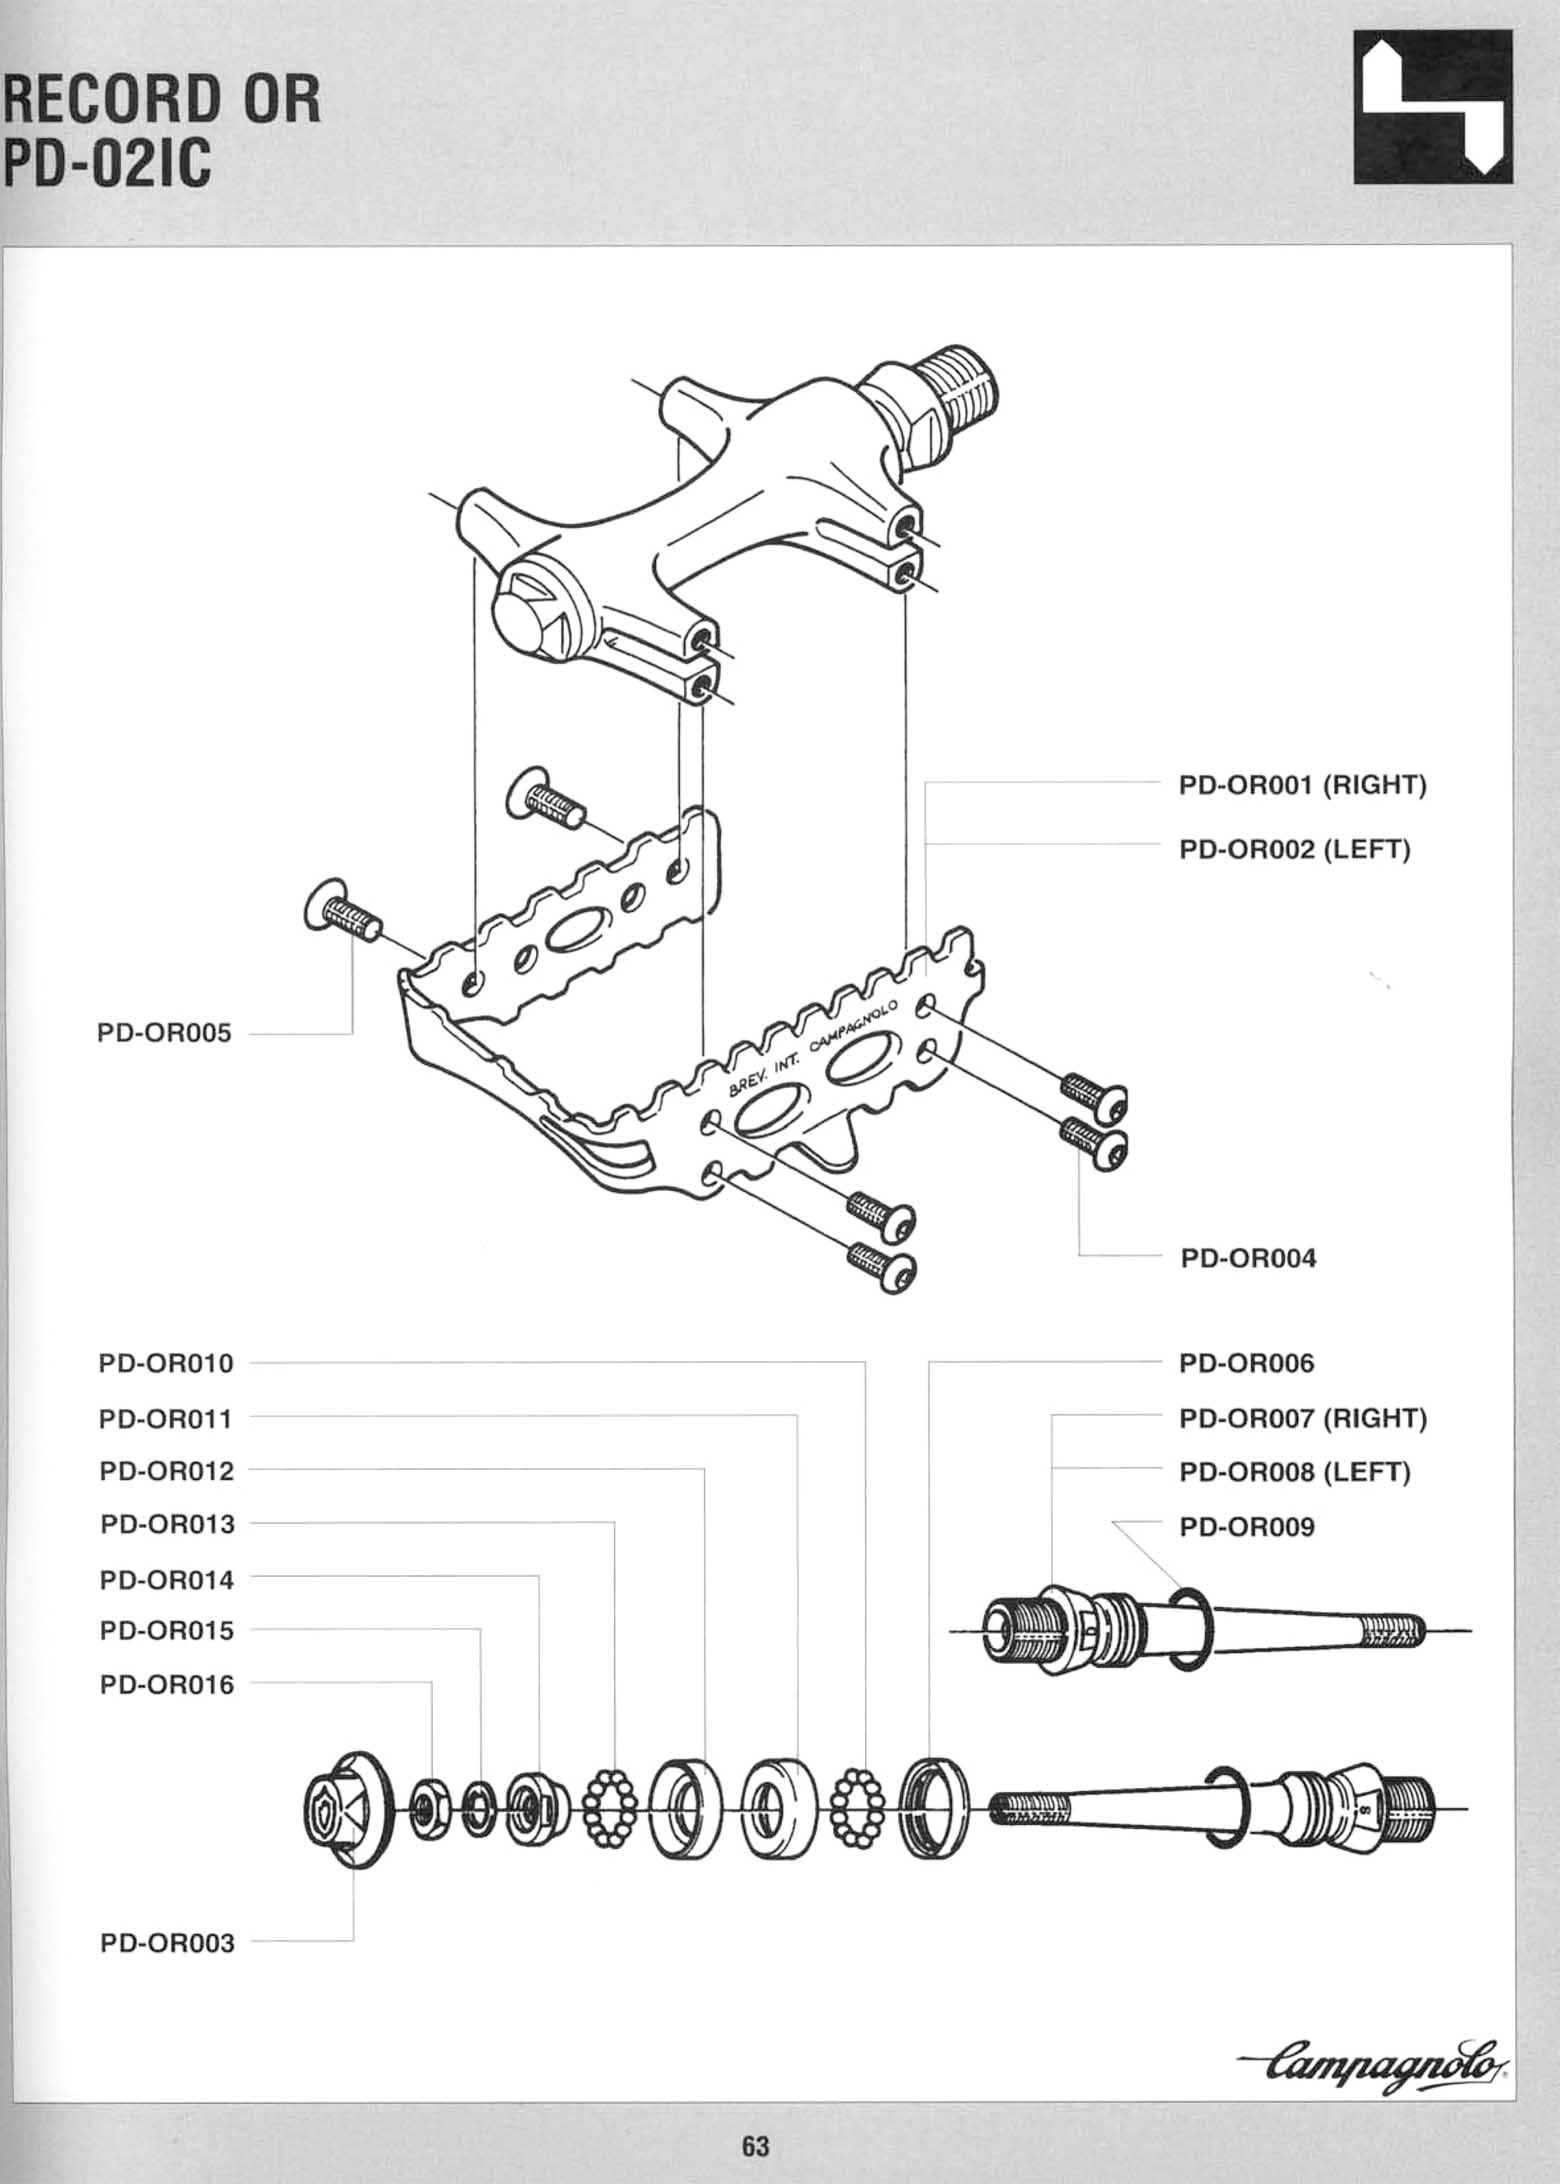 Campagnolo Spare Parts Catalogue - 1995 Product Range page 63 main image